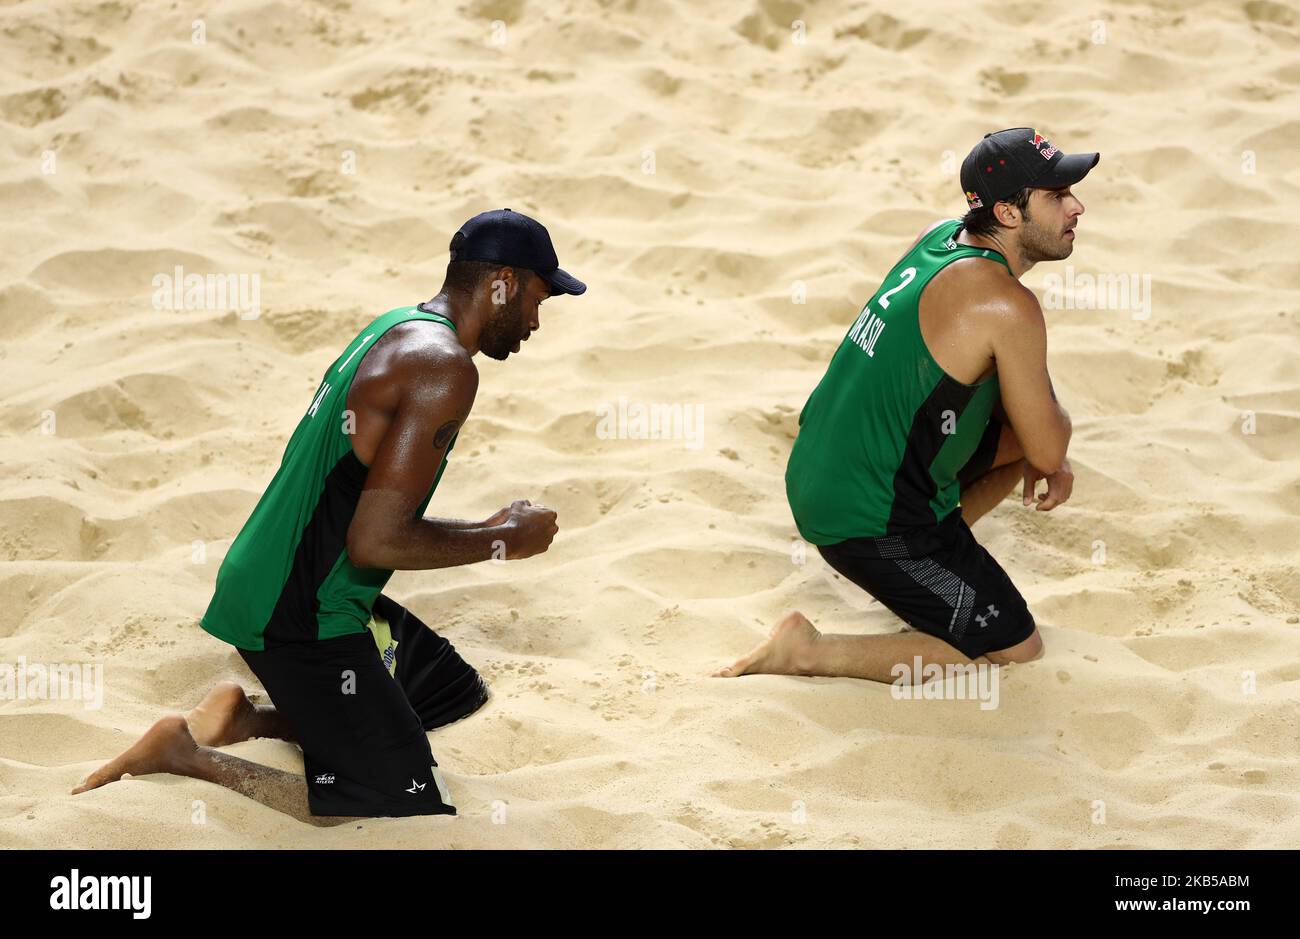 Evandro Goncalves and Bruno Oscar Schmidt (BRA) celebrate during the Beach Volley Rome World Tour Finals Main Draw Pool G match at the Foro Italico in Rome, Italy on September 5, 2019 (Photo by Matteo Ciambelli/NurPhoto) Stock Photo